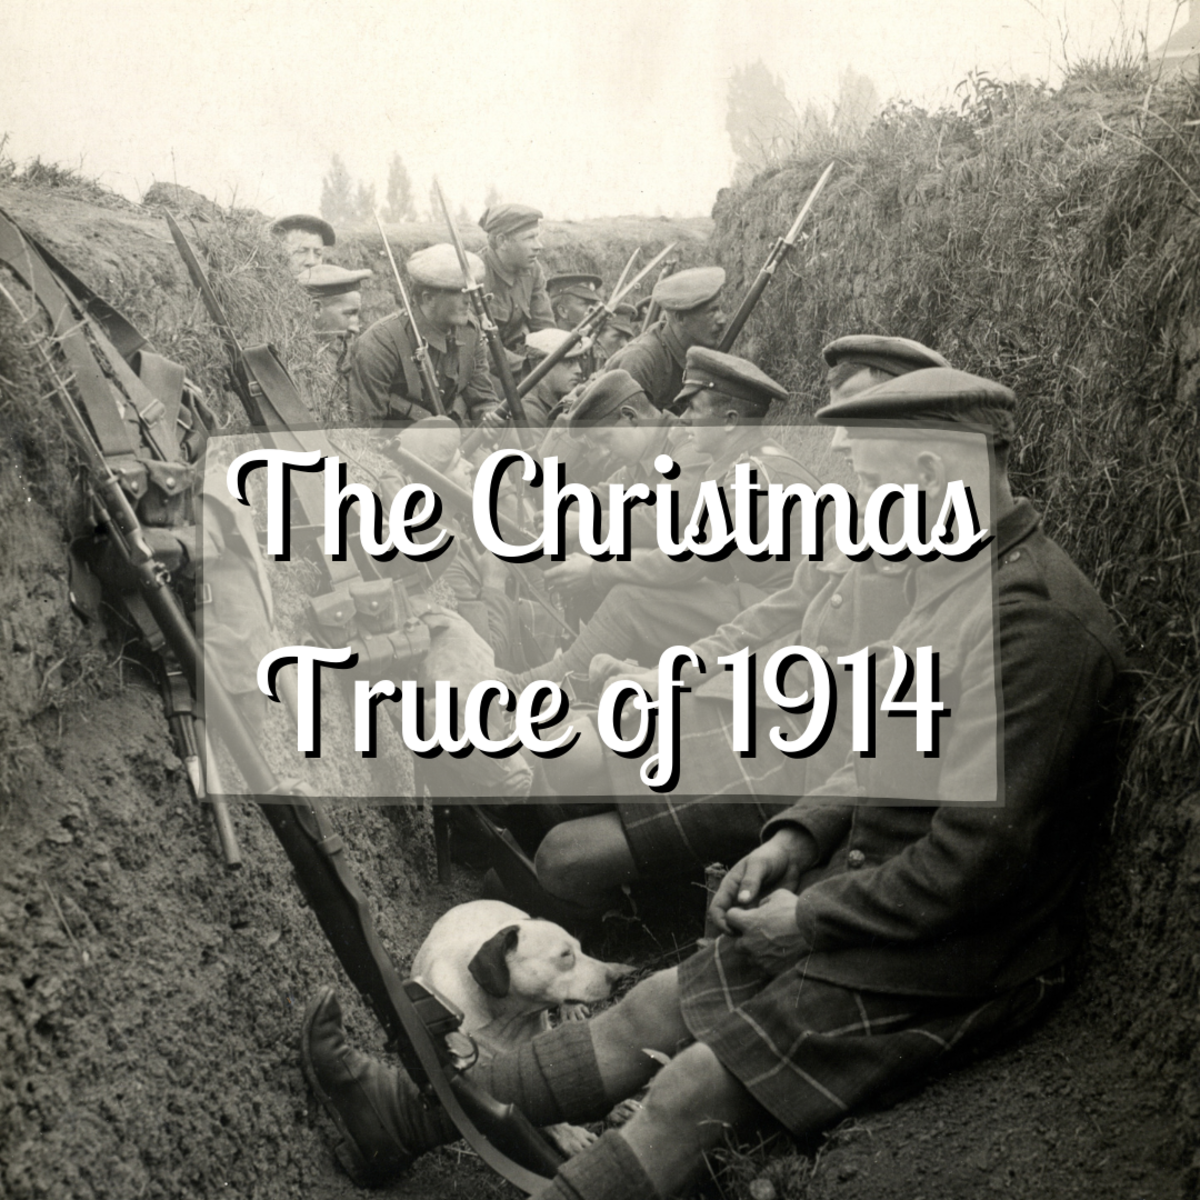 On Christmas 1914, the Western Front experienced an amazing ceasefire as British and German troops intermingled, exchanged gifts, and even sang carols